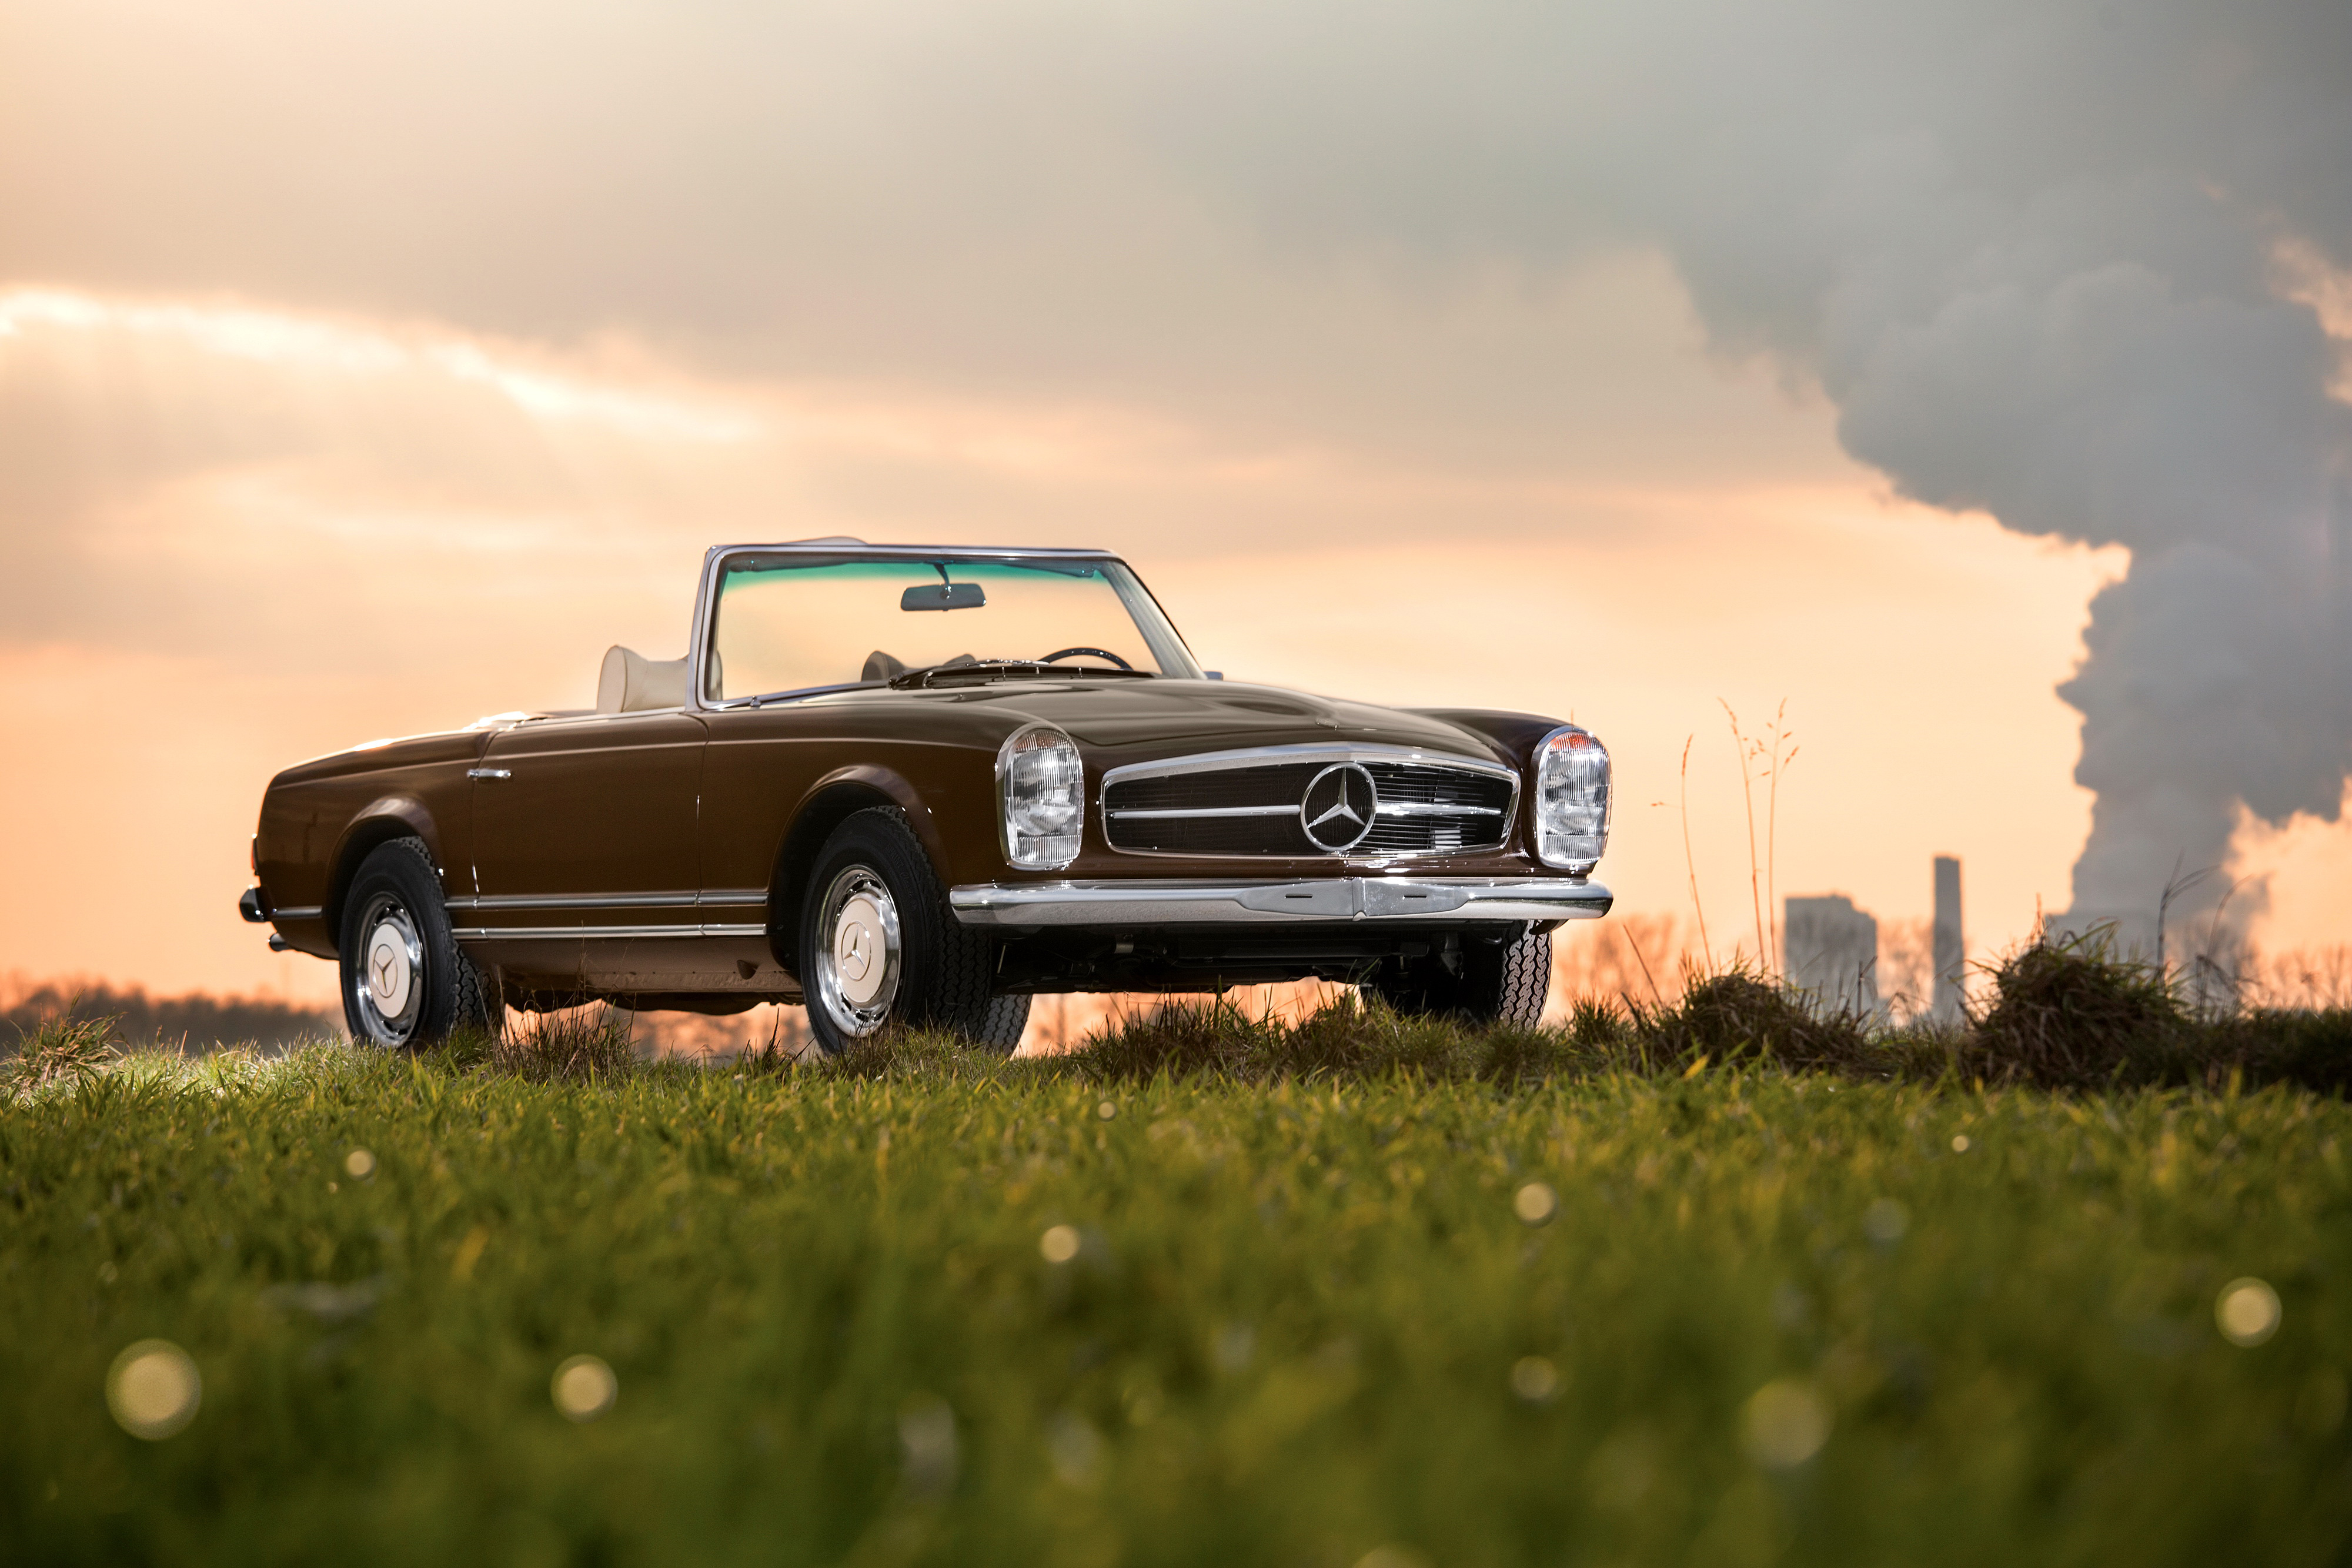 Mercedes Benz 280 SL 1968, HD Cars, 4k Wallpapers, Images, Backgrounds,  Photos and Pictures